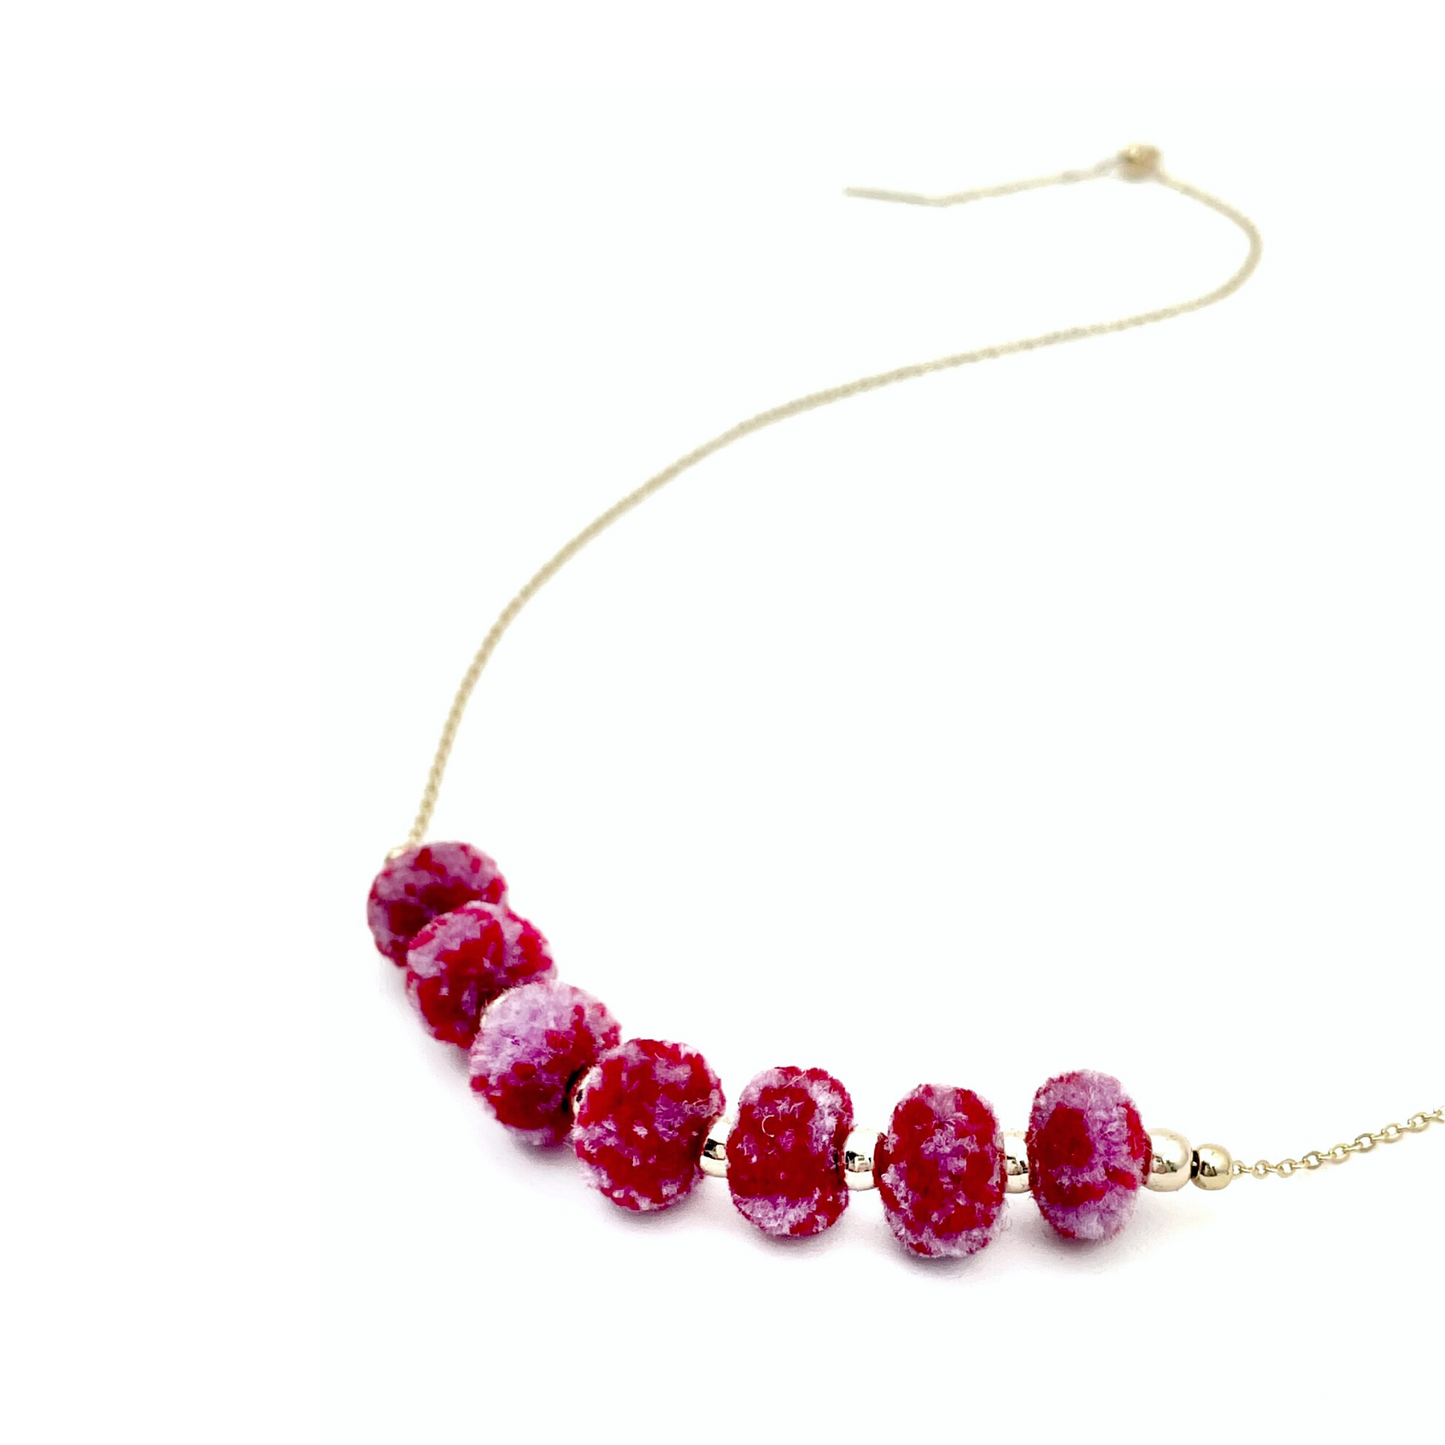 pom'd necklace in cranberry